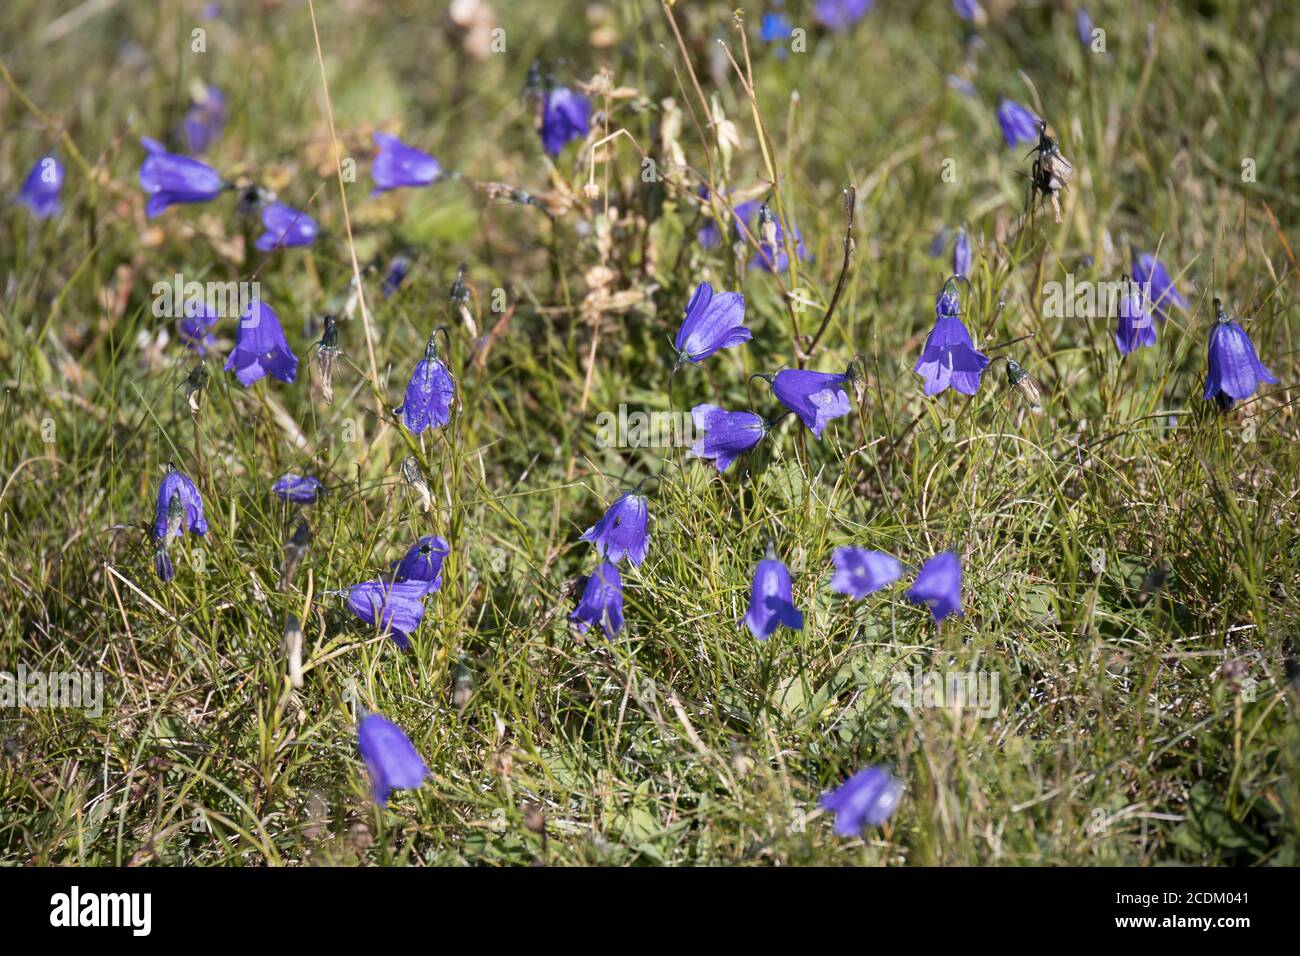 Blue Harebell flowers blooming in the Dolomites Stock Photo